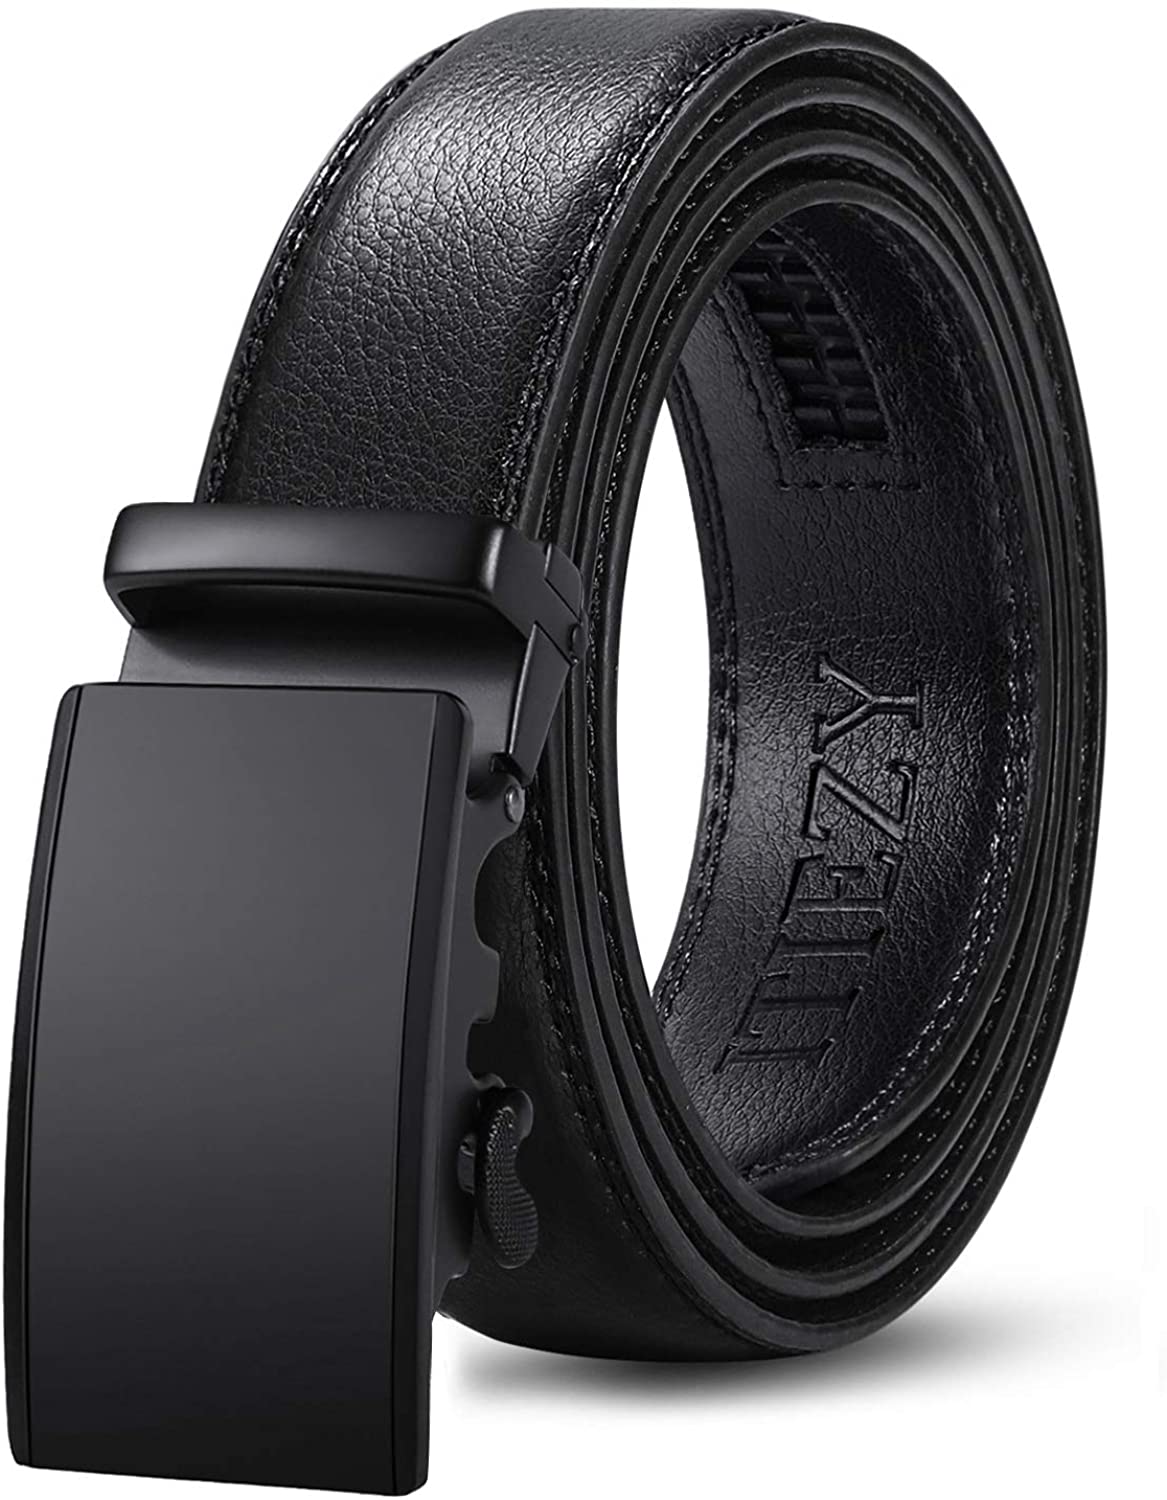 ITIEZY Mens Ratchet Leather Dress Belt Adjustable Slide Belt with Automatic Buckle in Gift Box